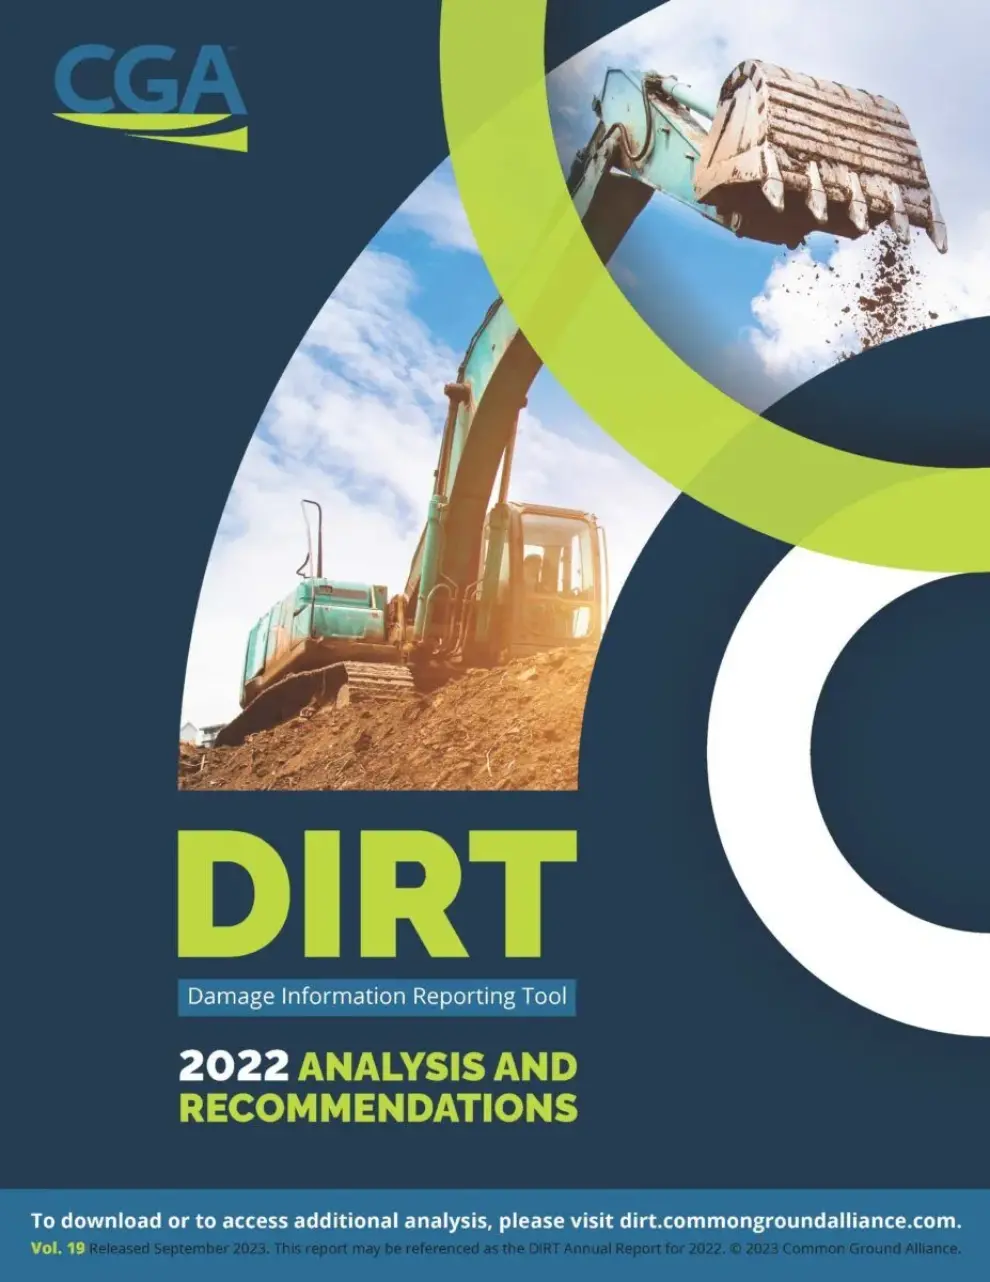 Common Ground Alliance’s DIRT Report Highlights Correlation Between Investment in Infrastructure and Increased Excavation-Related Damage to Buried Utilities